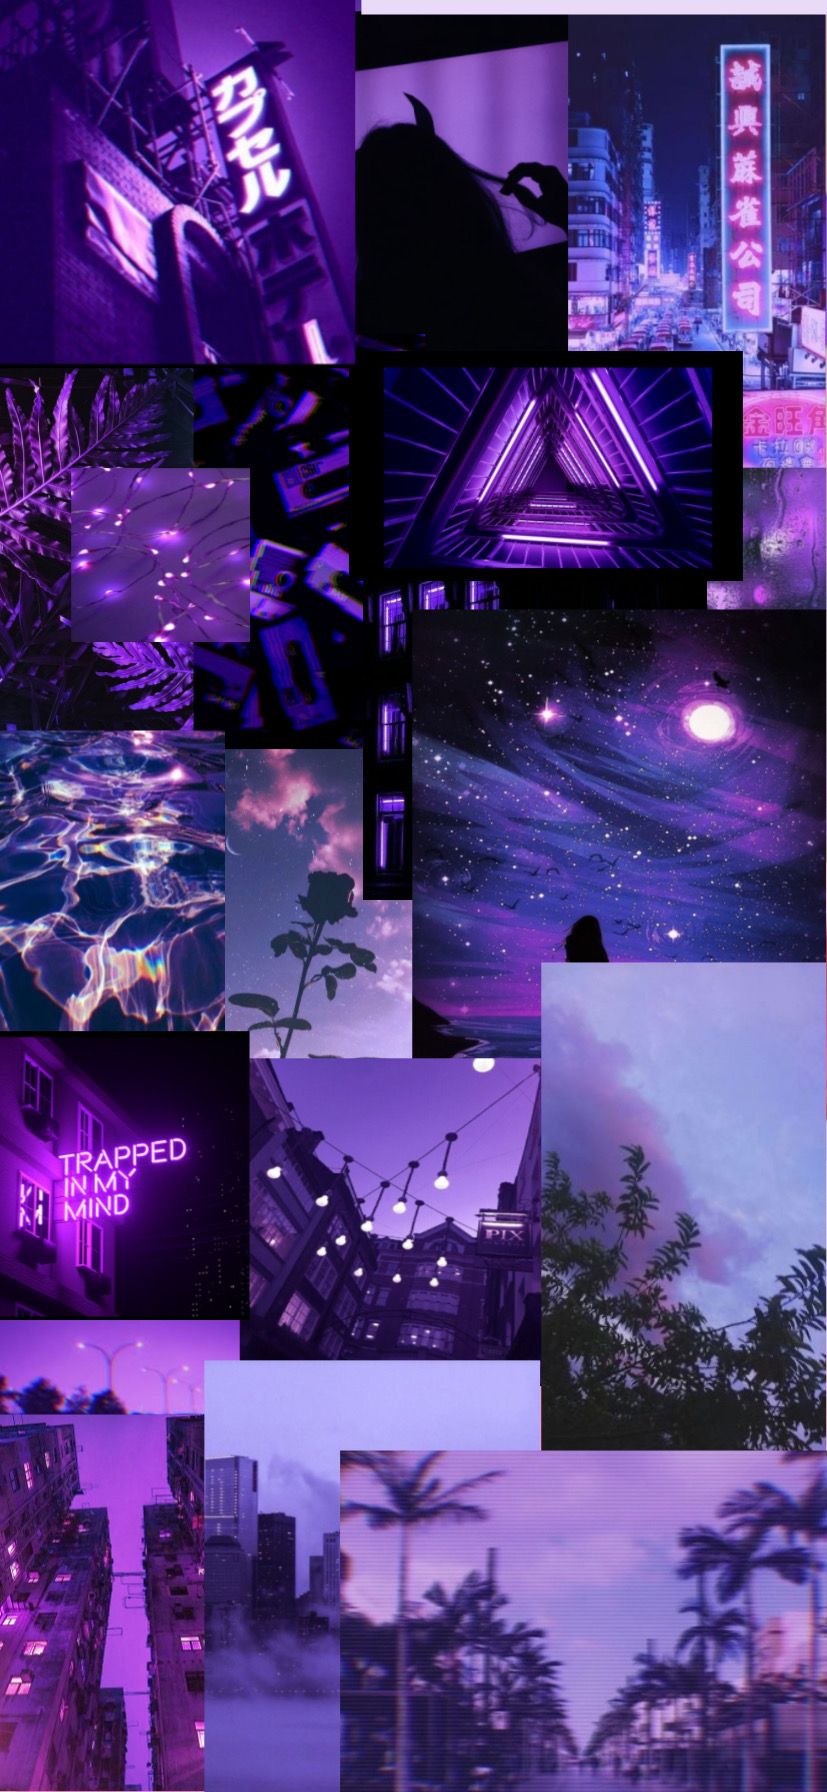 A collage of pictures with purple and blue colors - Neon purple, light purple